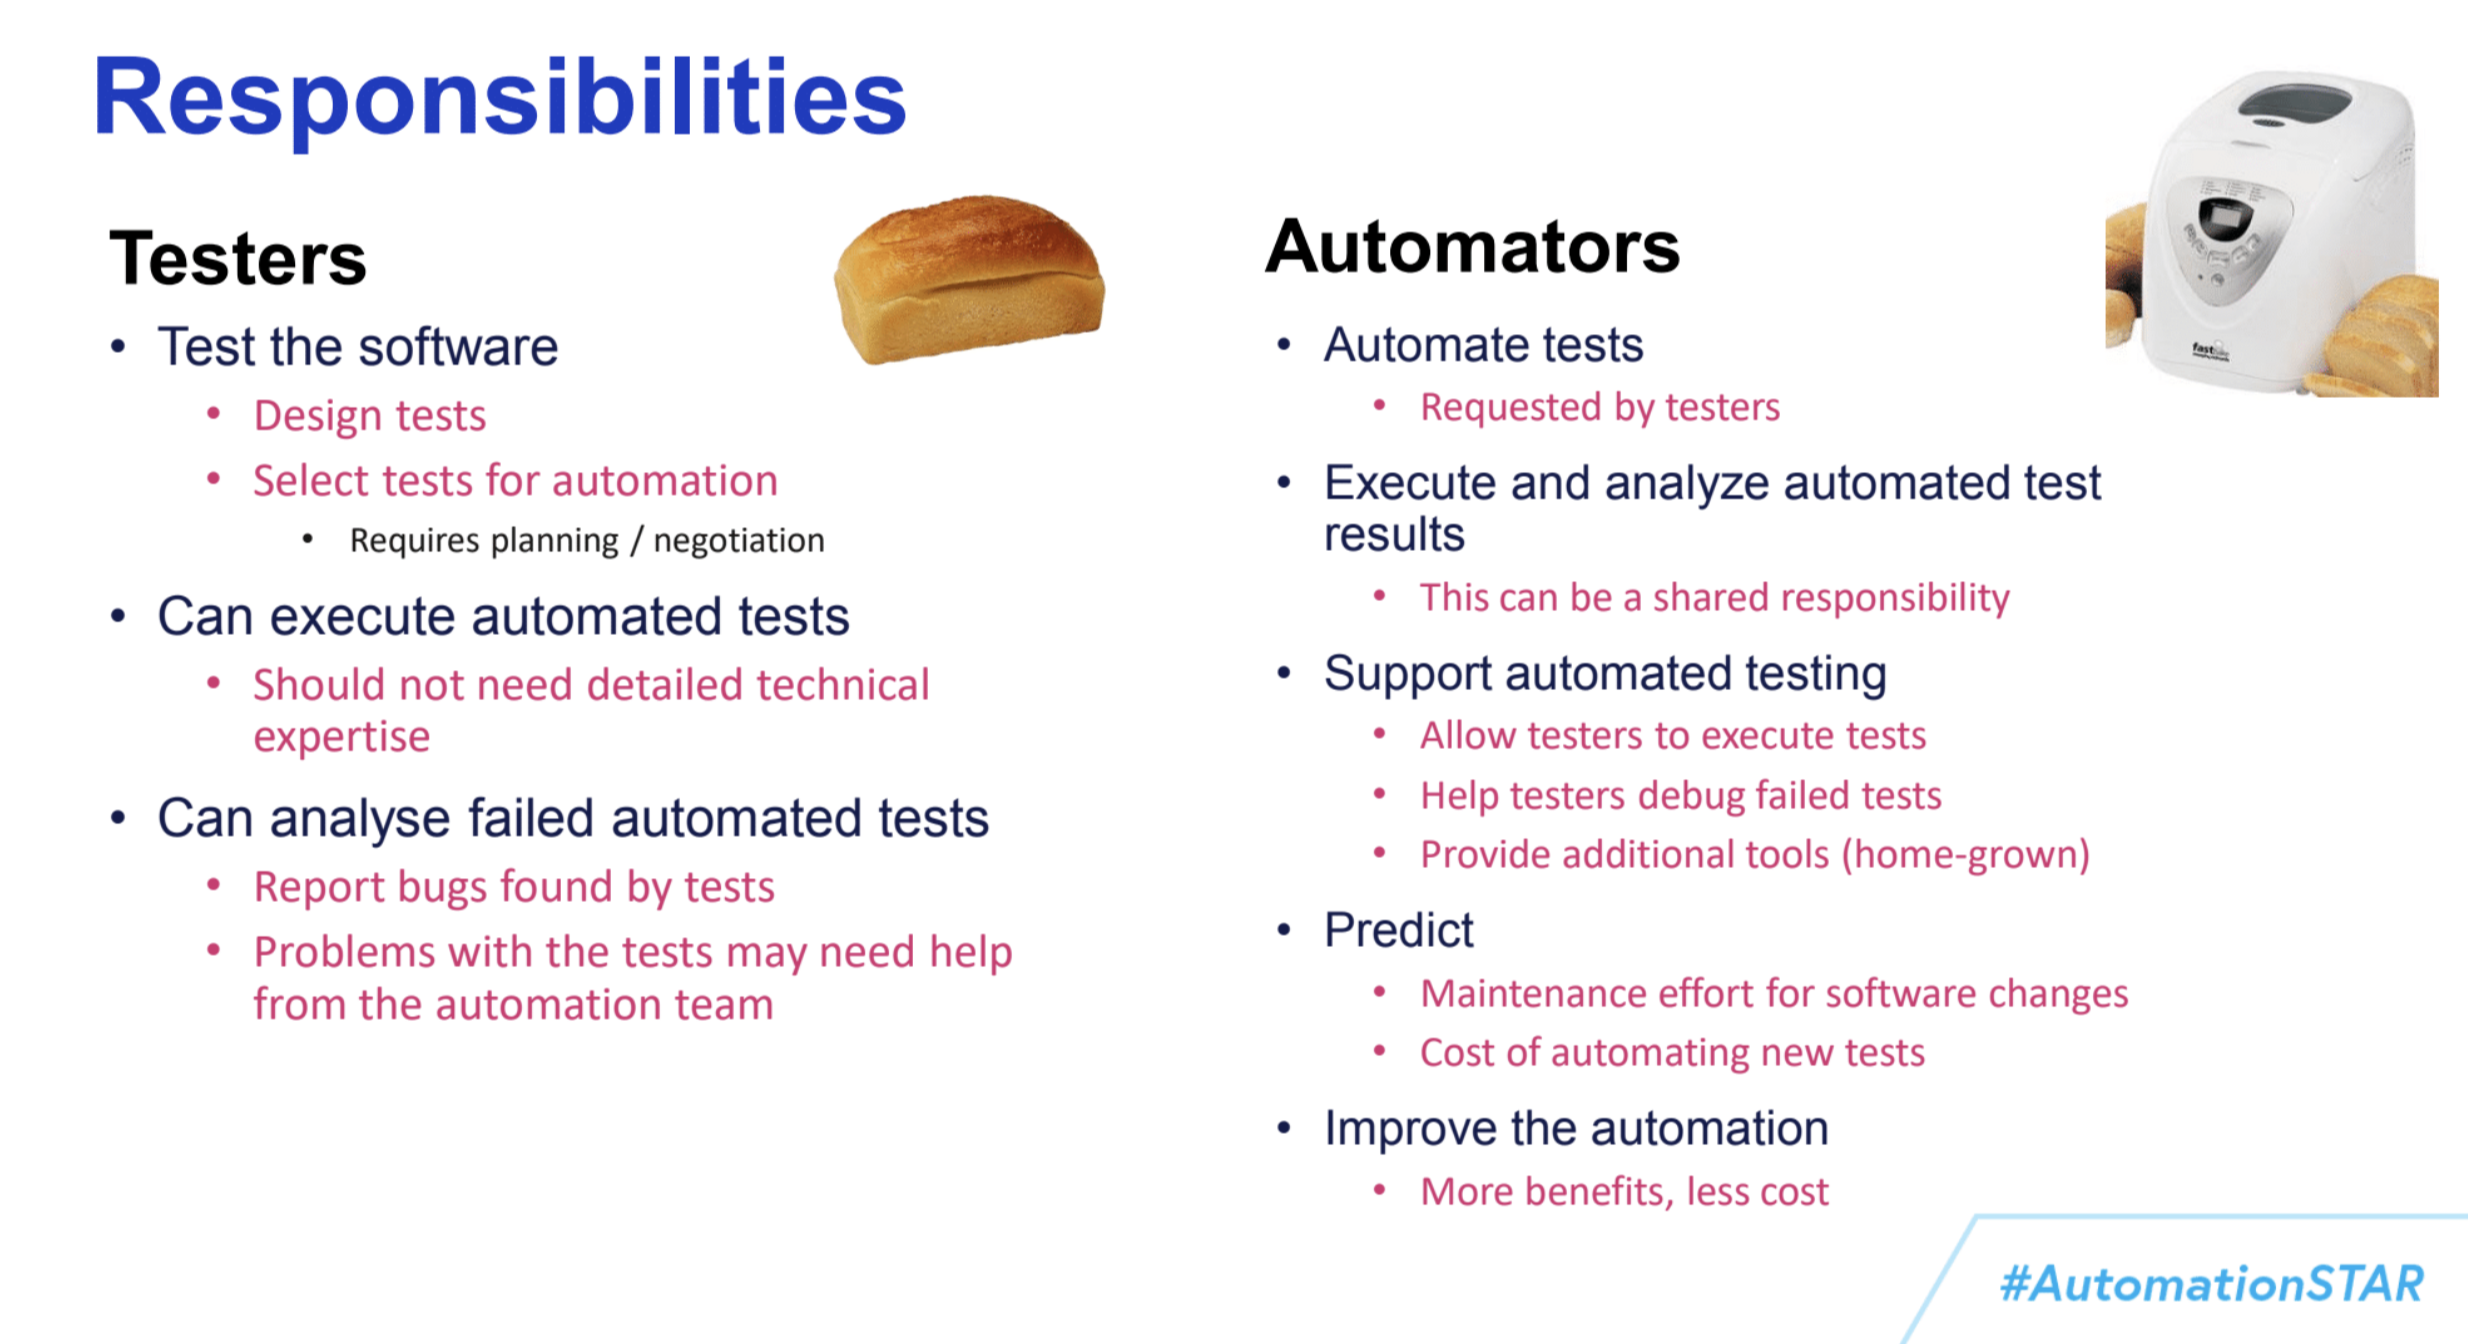 Figure 3: Responsibilities of Automators and Testers